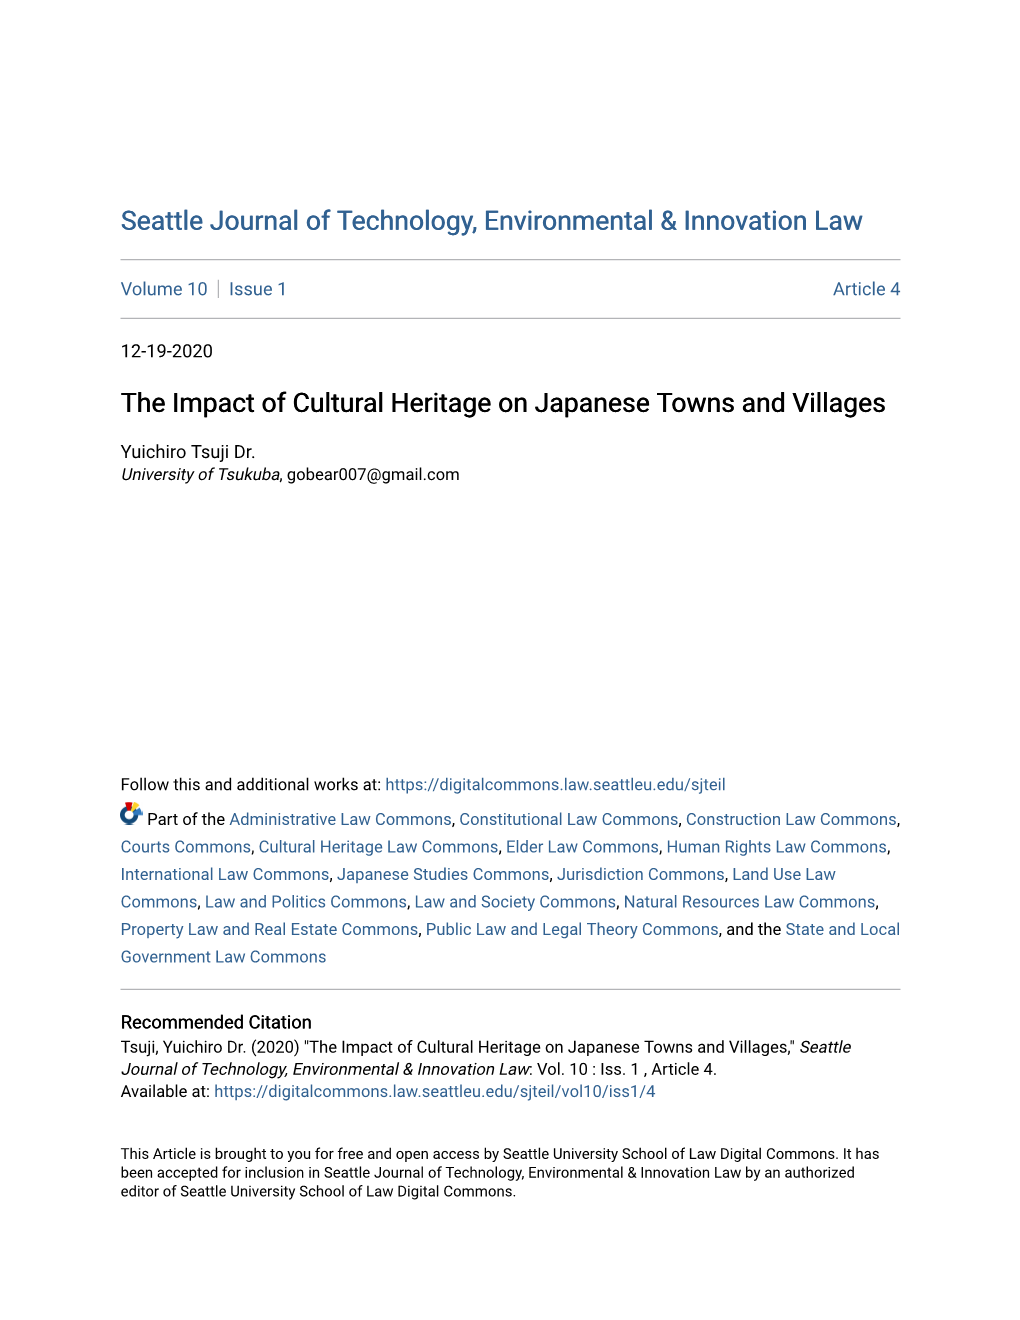 The Impact of Cultural Heritage on Japanese Towns and Villages